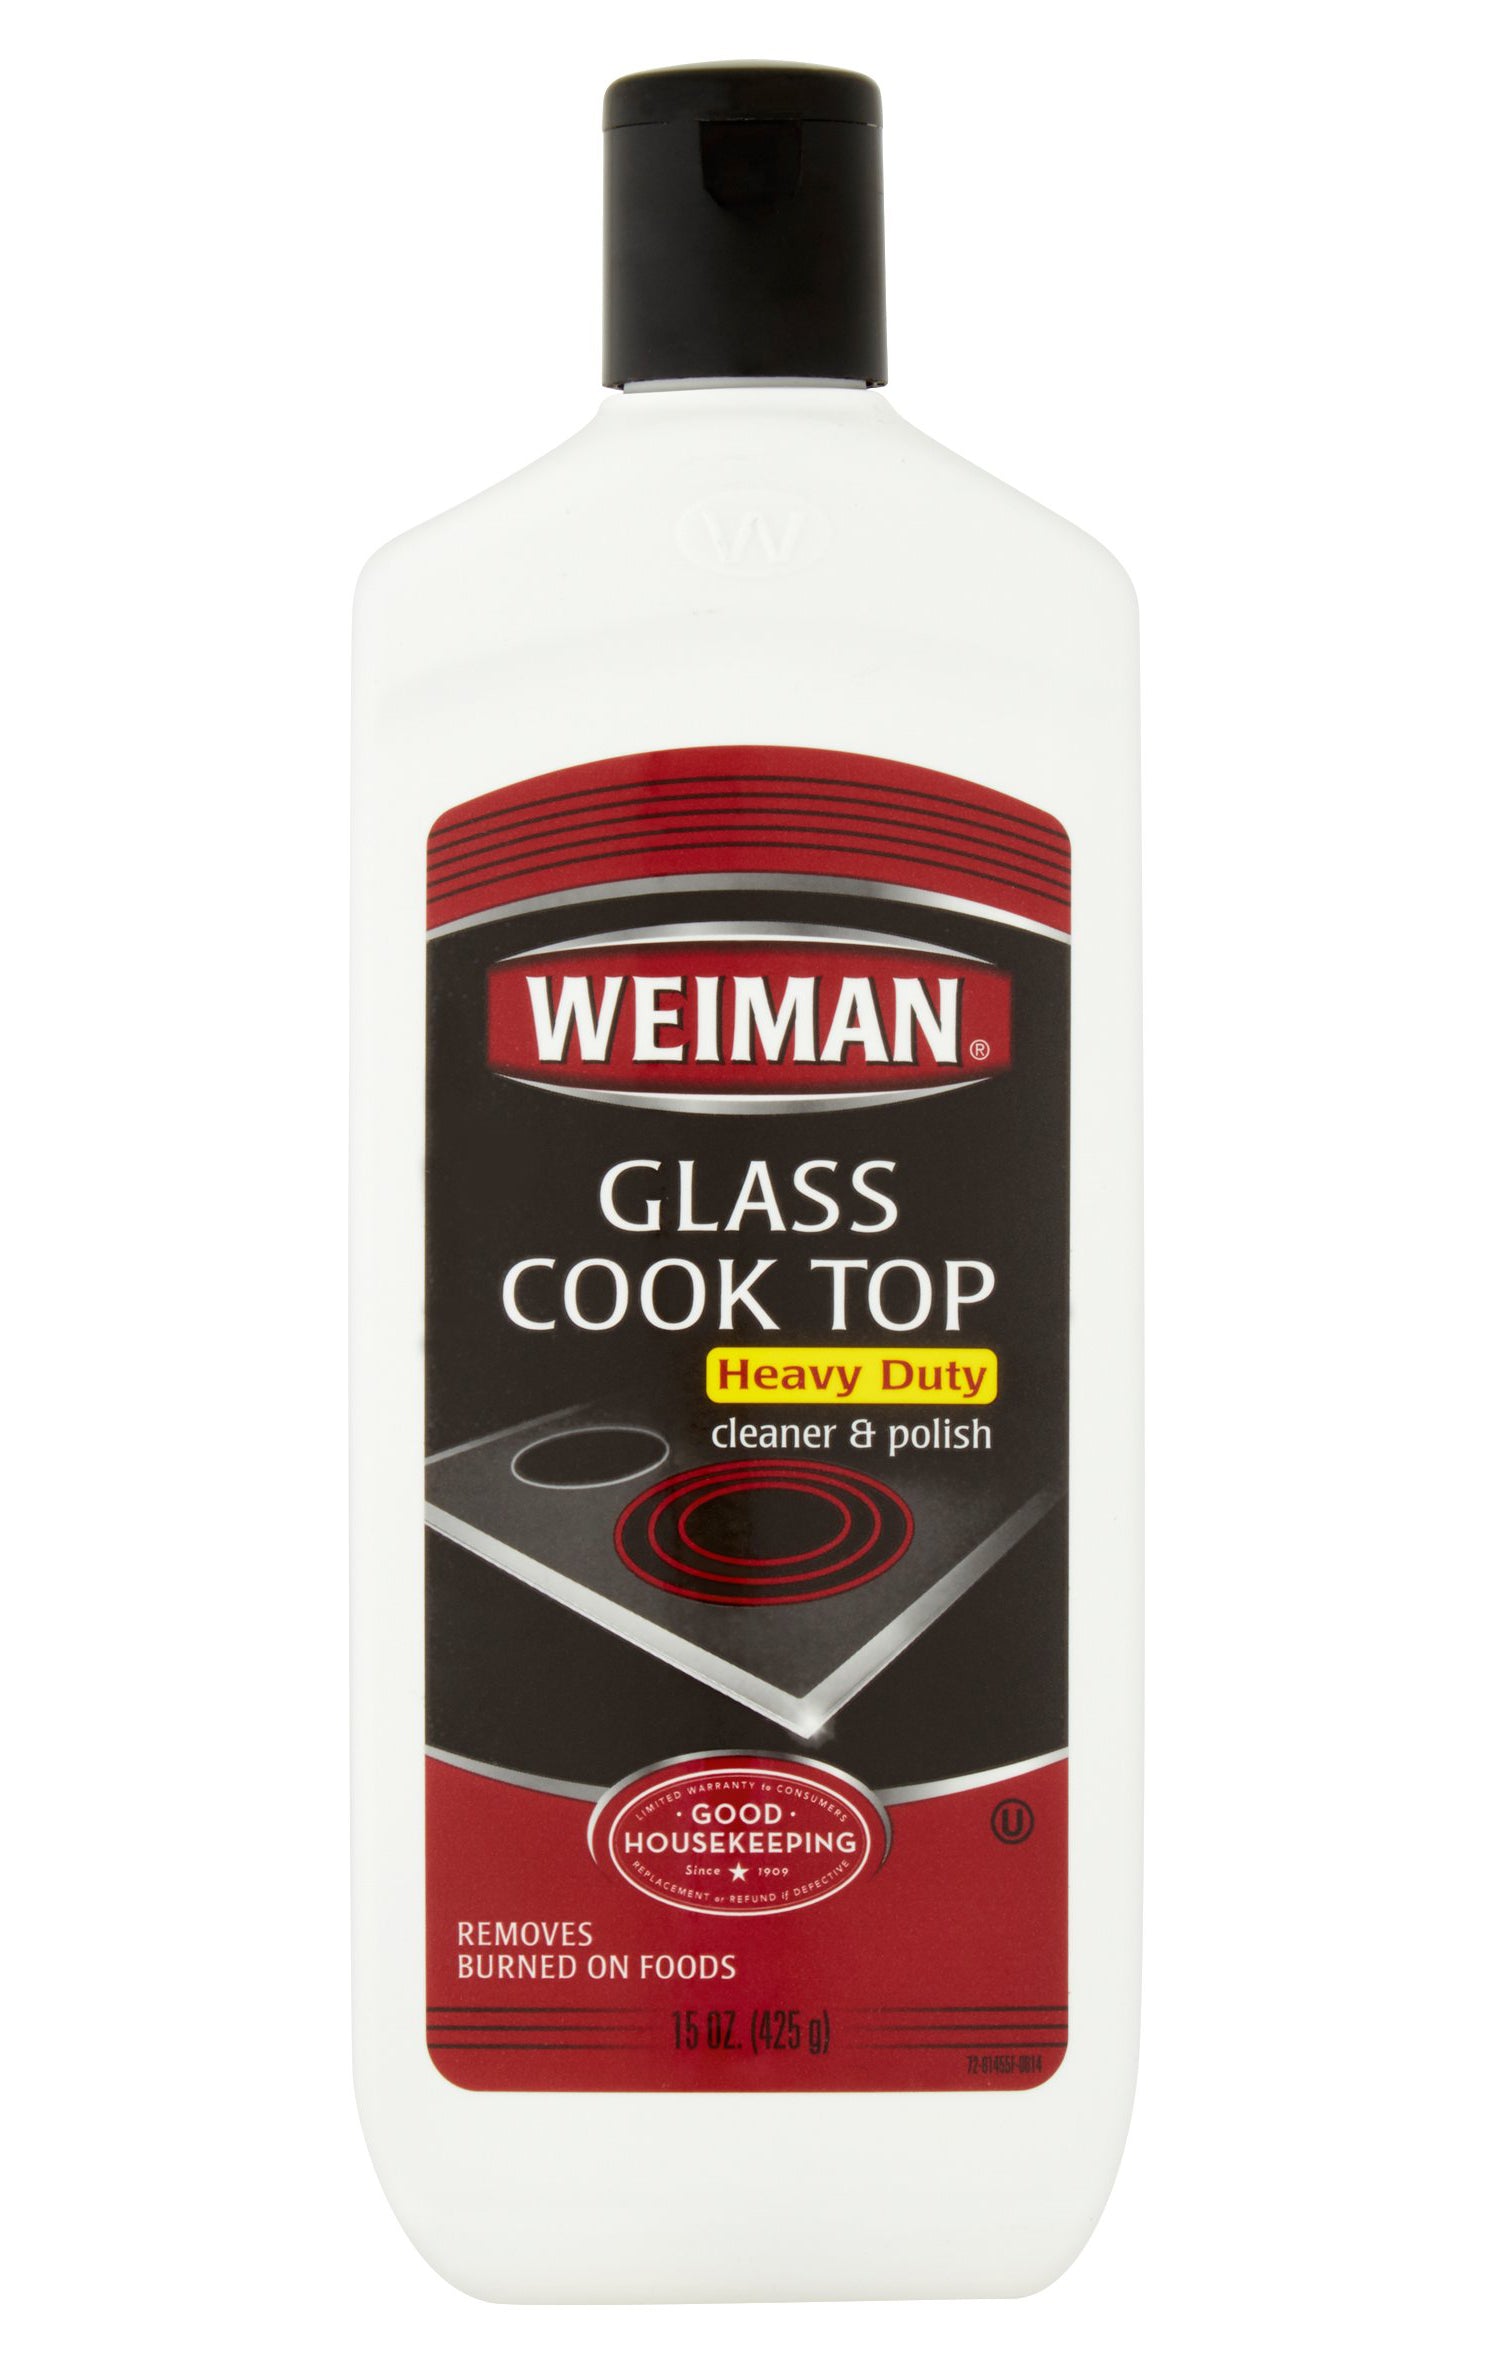 Weiman Glass & Ceramic Cooktop Cleaner and Polish - 15 Ounce 